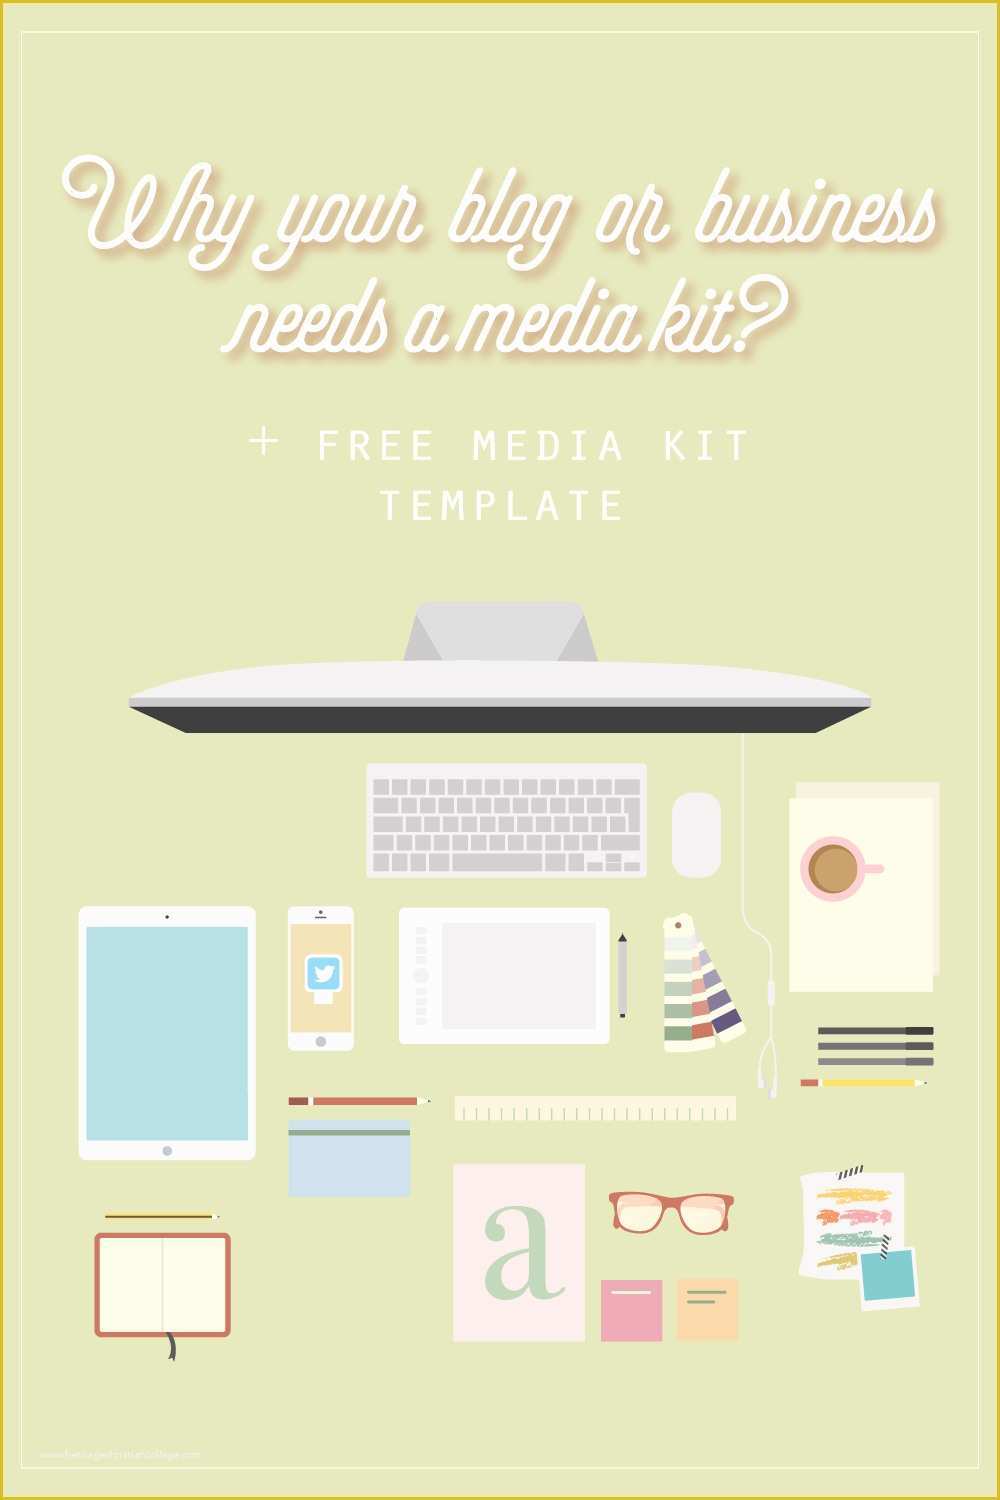 Free Press Kit Template Of why Your Blog or Business Needs A Media Kit Free Media